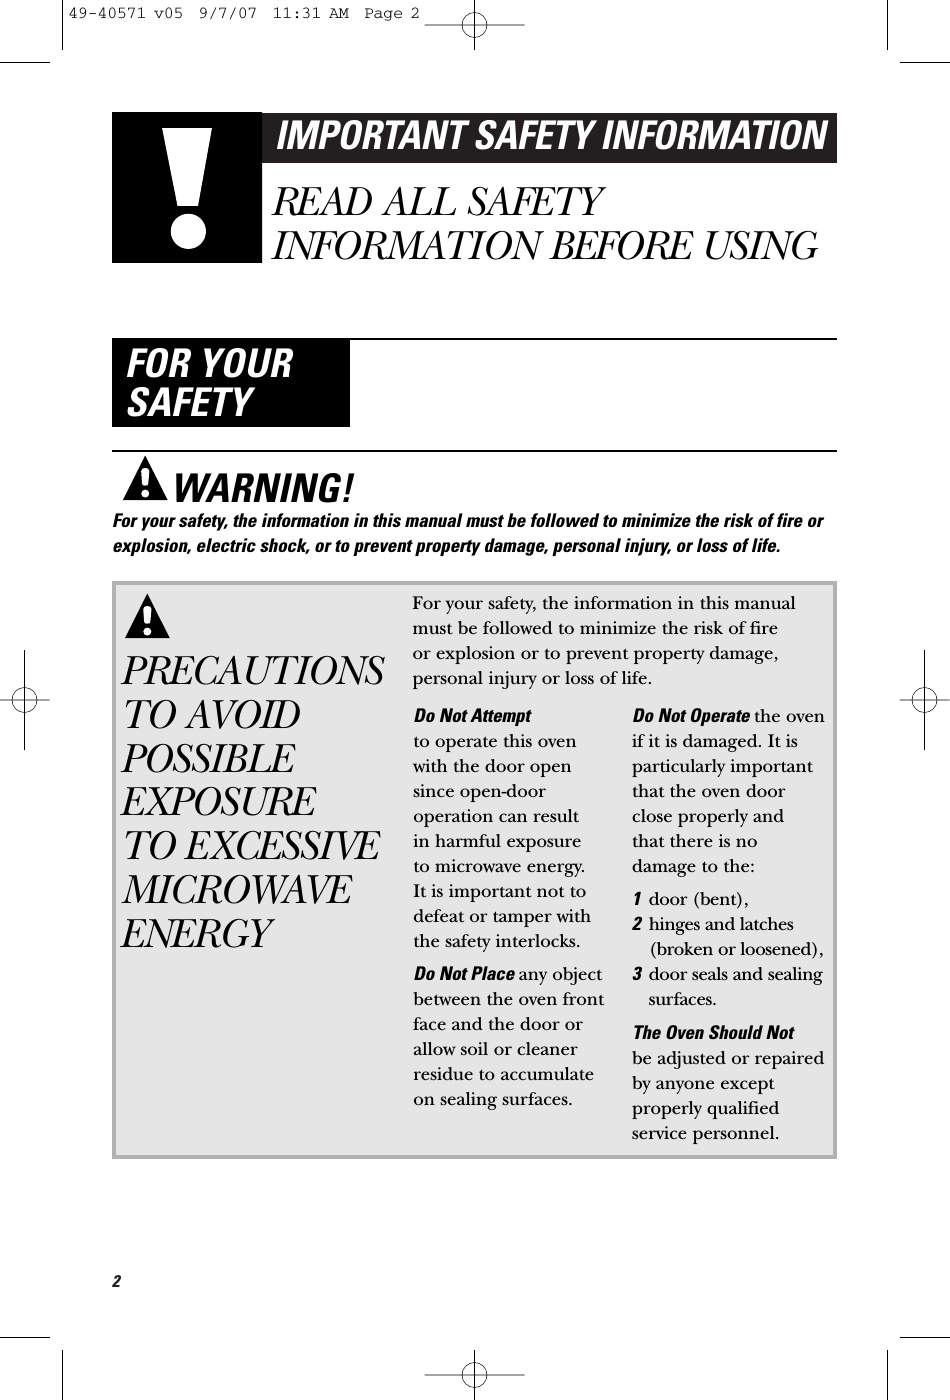 2IMPORTANT SAFETY INFORMATIONREAD ALL SAFETYINFORMATION BEFORE USINGFOR YOURSAFETYPRECAUTIONSTO AVOIDPOSSIBLEEXPOSURE TO EXCESSIVEMICROWAVEENERGYFor your safety, the information in this manualmust be followed to minimize the risk of fire or explosion or to prevent property damage,personal injury or loss of life.Do Not Attempt to operate this ovenwith the door opensince open-dooroperation can result in harmful exposure to microwave energy. It is important not todefeat or tamper withthe safety interlocks.Do Not Place any objectbetween the oven frontface and the door orallow soil or cleanerresidue to accumulateon sealing surfaces.Do Not Operate the oven if it is damaged. It isparticularly importantthat the oven doorclose properly and that there is nodamage to the:1door (bent),2hinges and latches(broken or loosened),3door seals and sealingsurfaces.The Oven Should Not be adjusted or repairedby anyone exceptproperly qualifiedservice personnel.WARNING!For your safety, the information in this manual must be followed to minimize the risk of fire orexplosion, electric shock, or to prevent property damage, personal injury, or loss of life.49-40571 v05  9/7/07  11:31 AM  Page 2